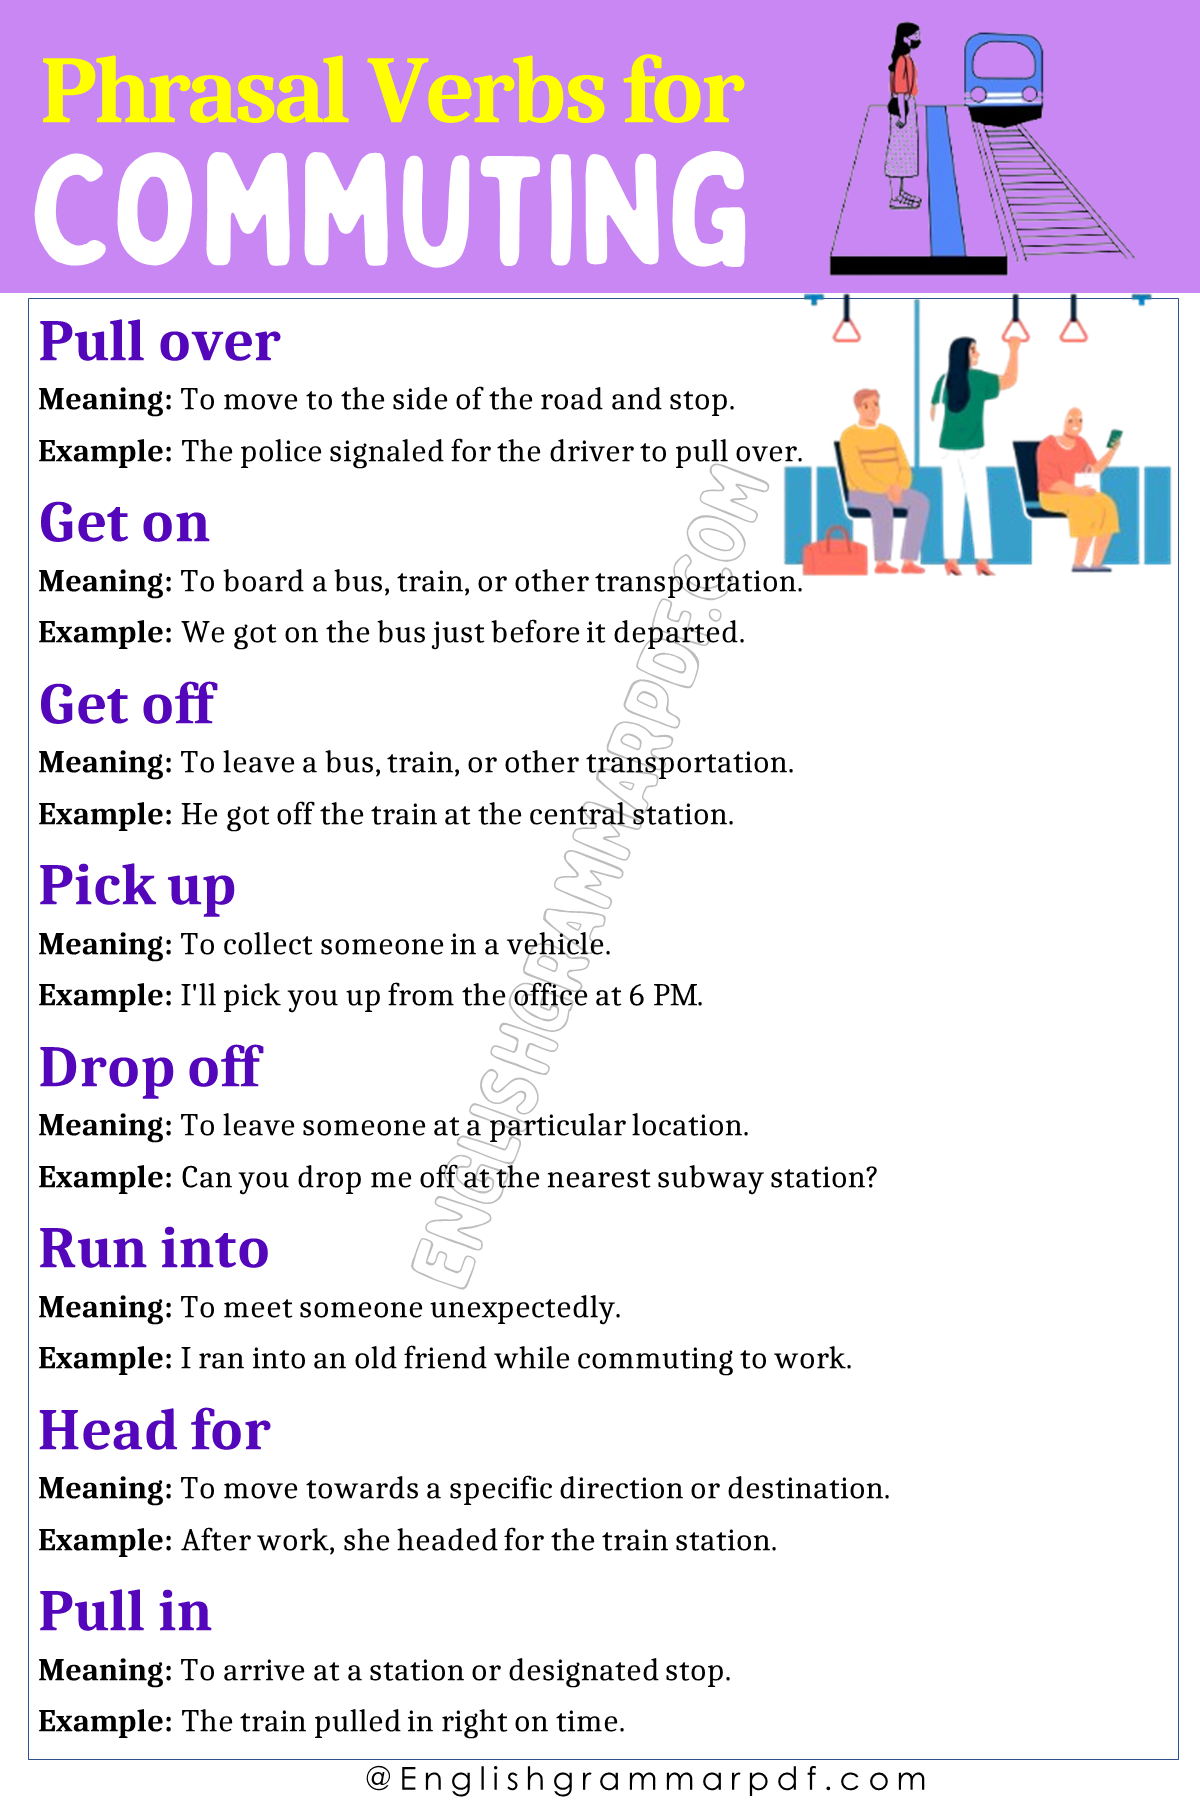 Phrasal Verbs for Commuting